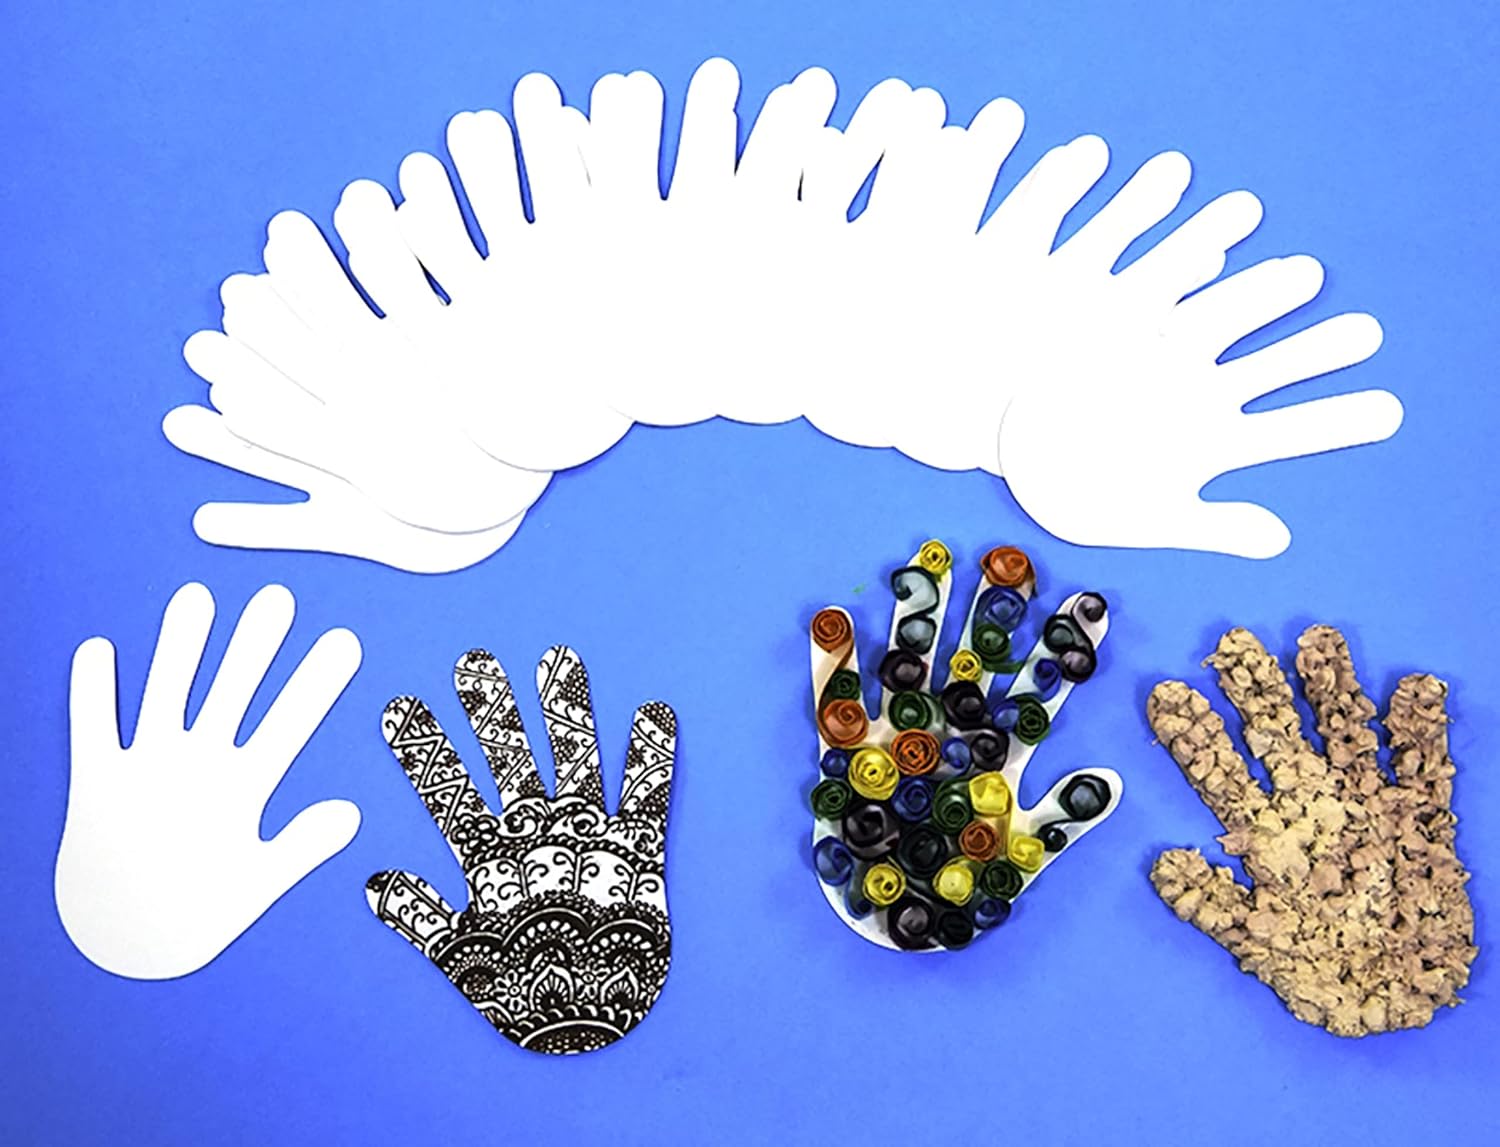 Paper Hands x 100 | Learning and Exploring Through Play